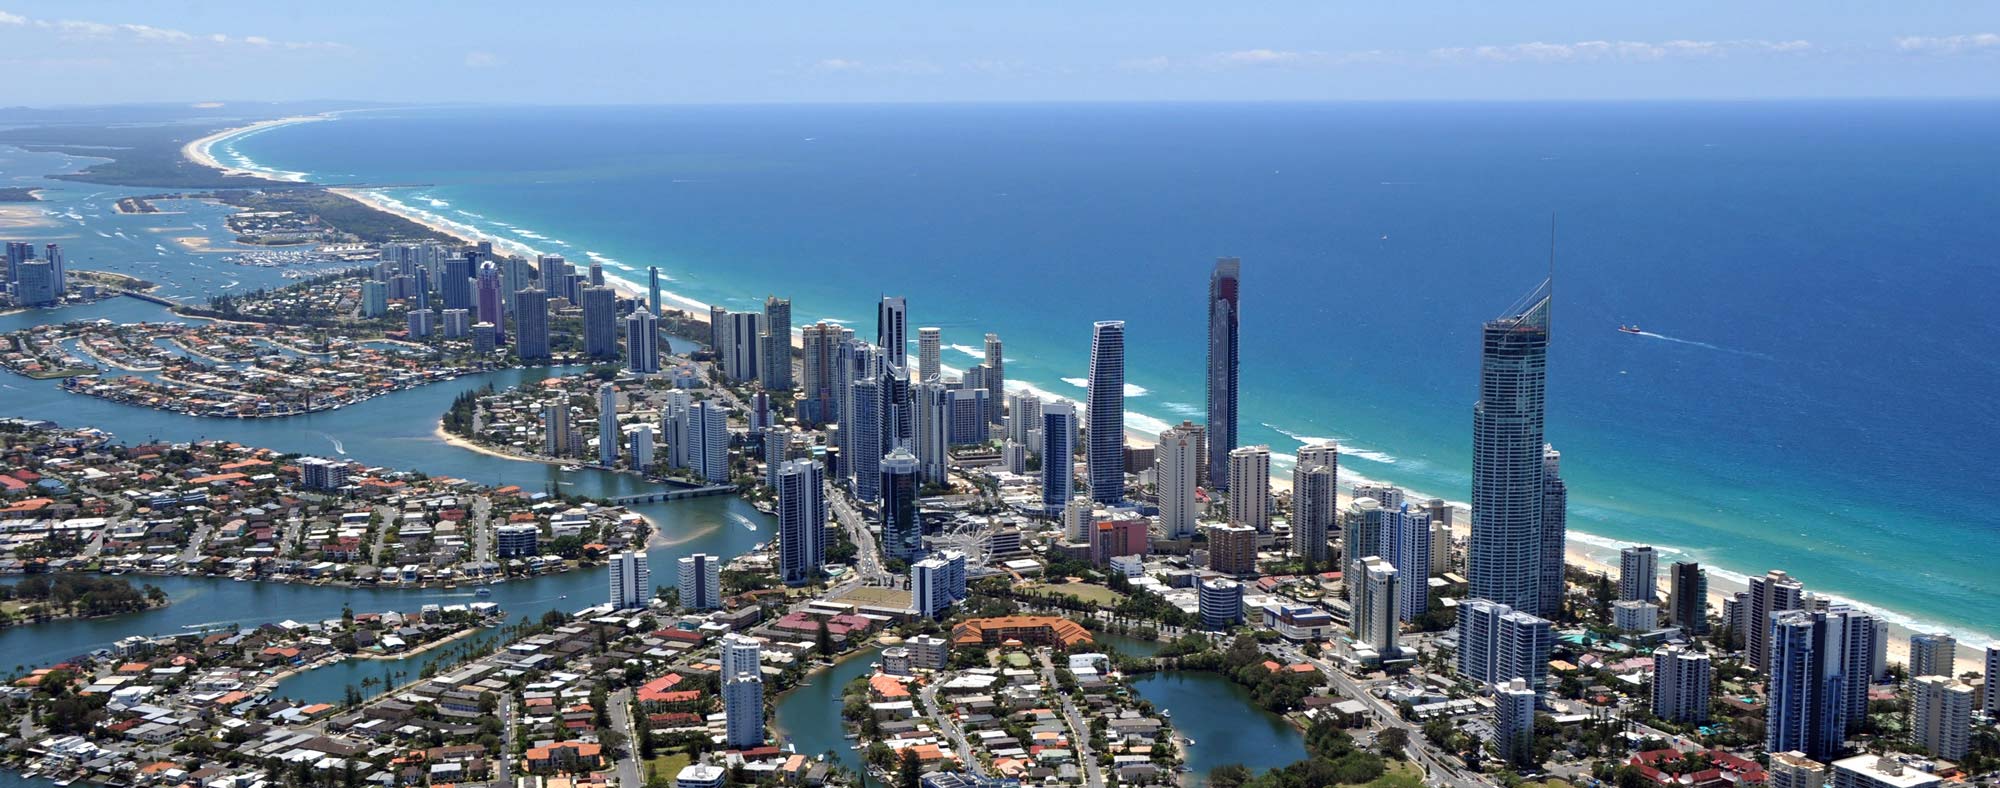 Surfers Paradise Holidays & Travel Guide